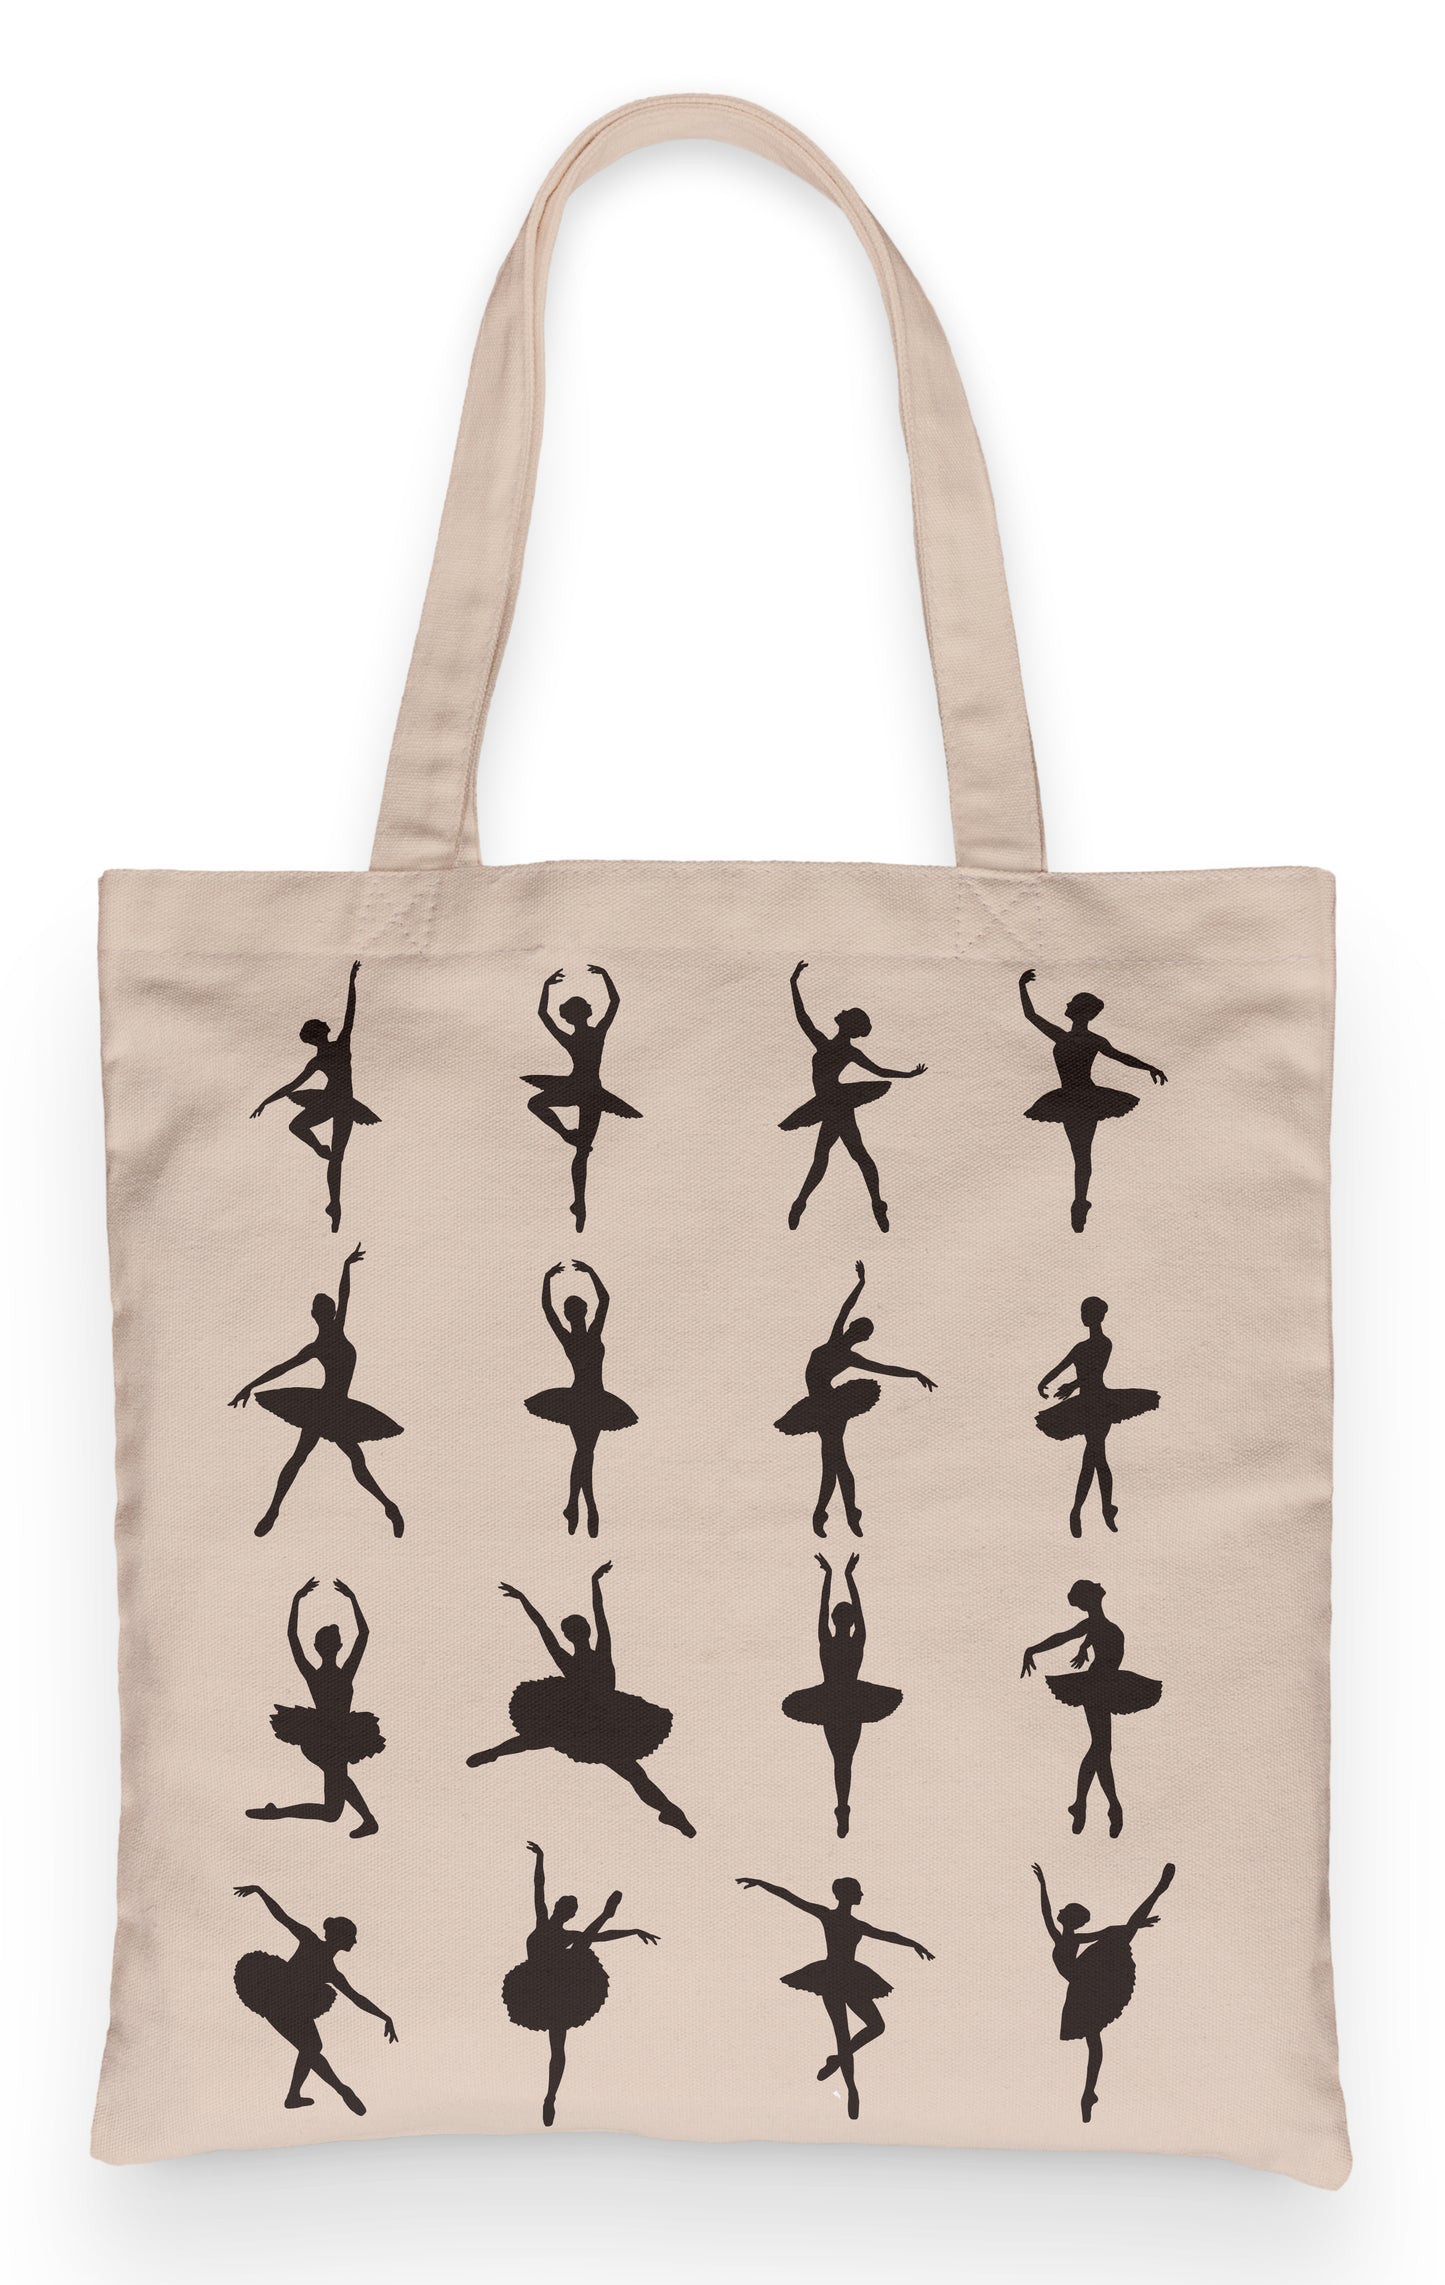 Ballerina Tote 100% Cotton Fun Grocery Tote, Book Tote, Office Tote. Premium Cotton Canvas 15.5" by 19.5 " with 5" Gusset on bottom